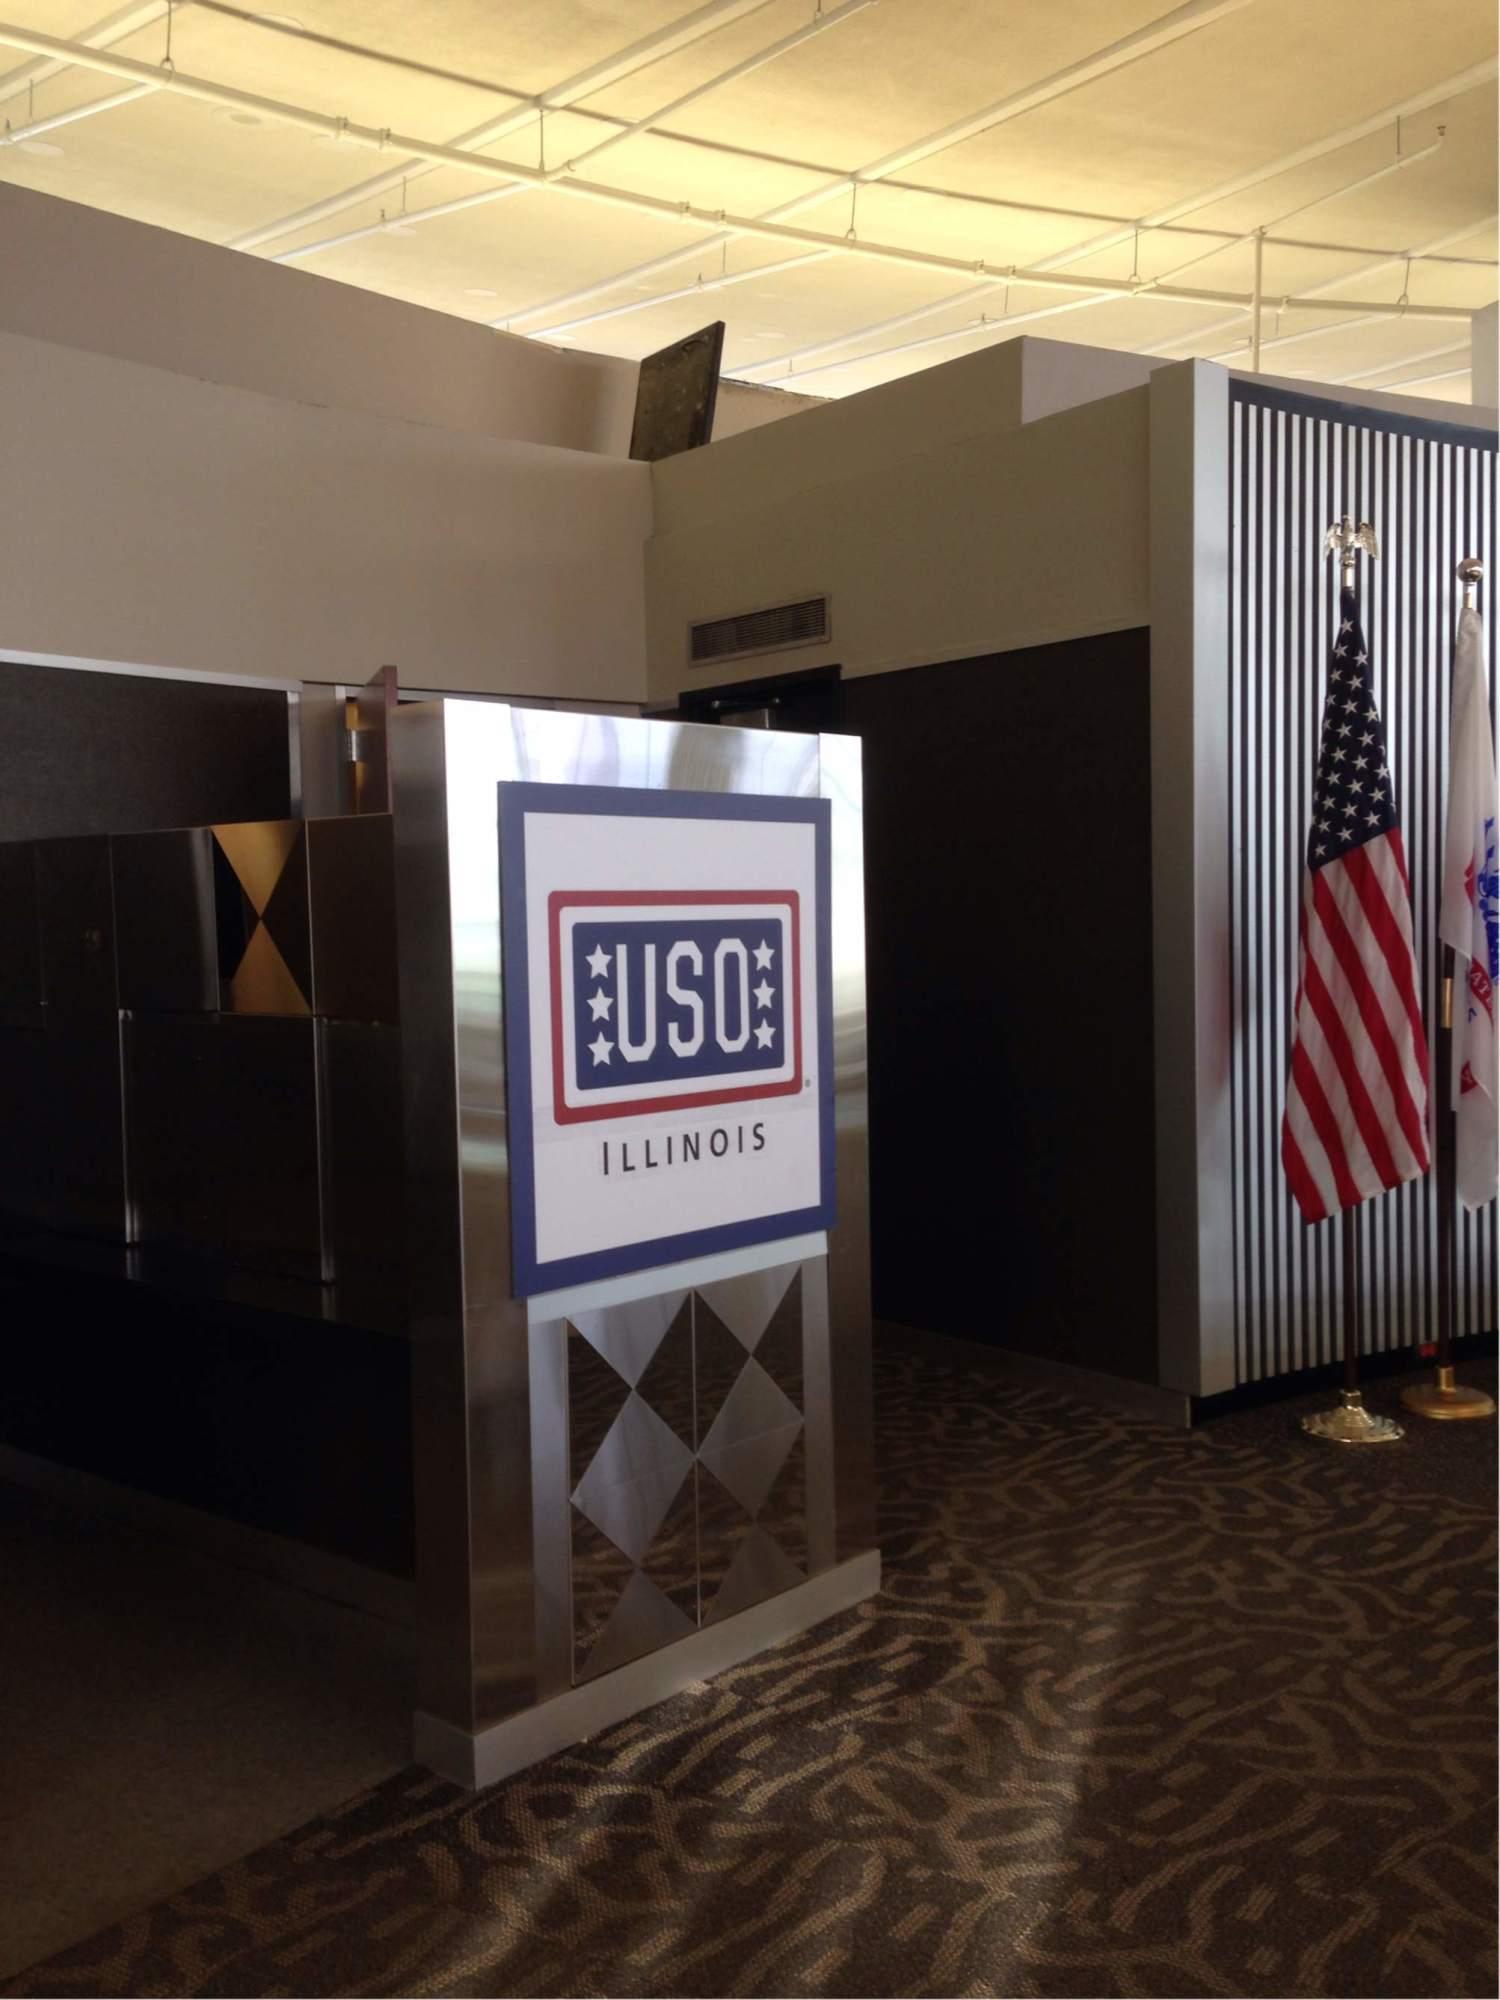 USO American Airlines Cyber Canteen Center image 2 of 8